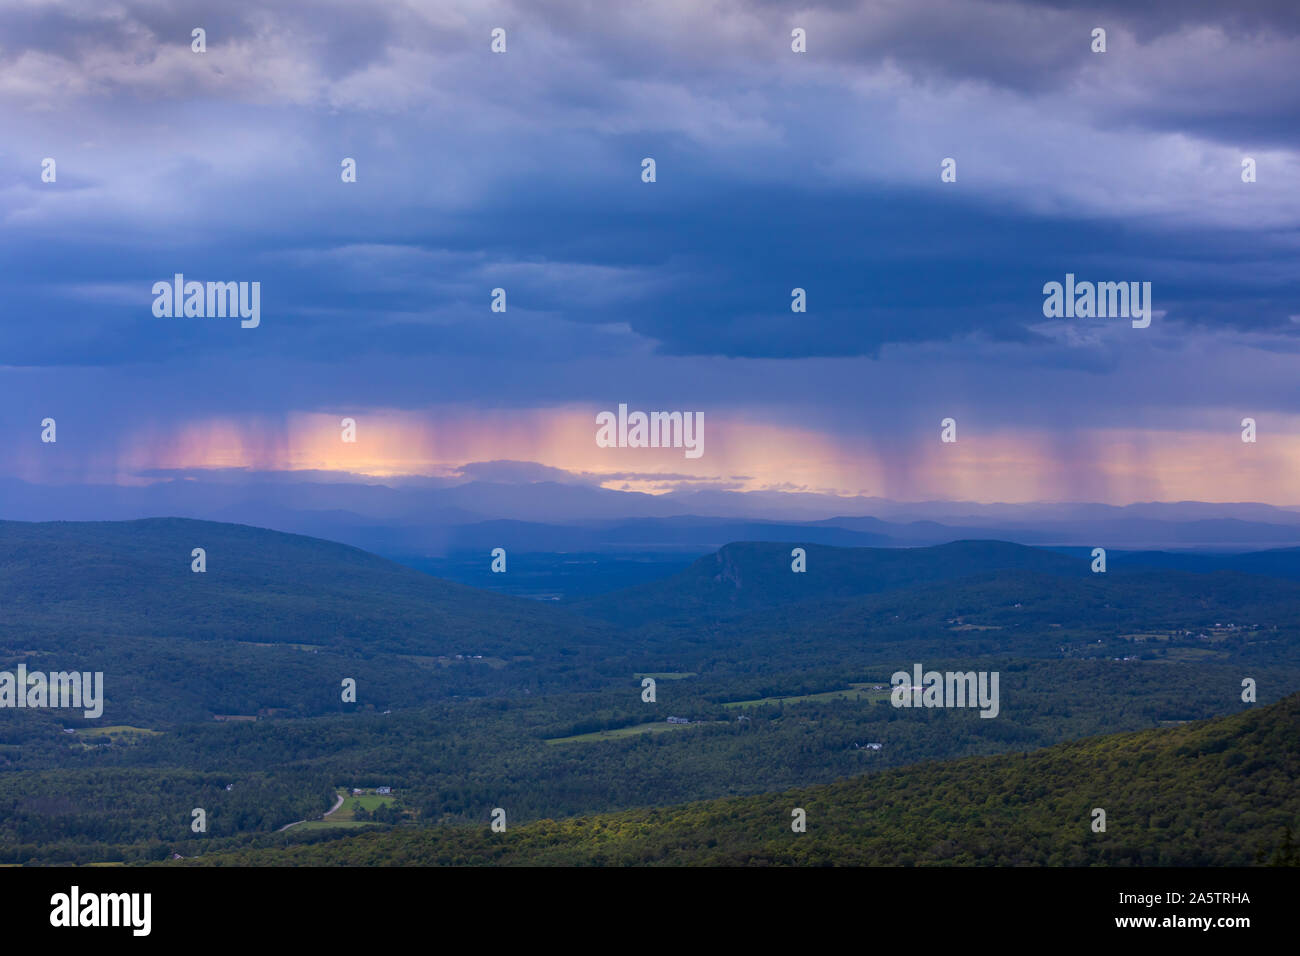 LINCOLN, VERMONT, USA - Rain storm over Champlain Valley and Green Mountains, central Vermont. Stock Photo